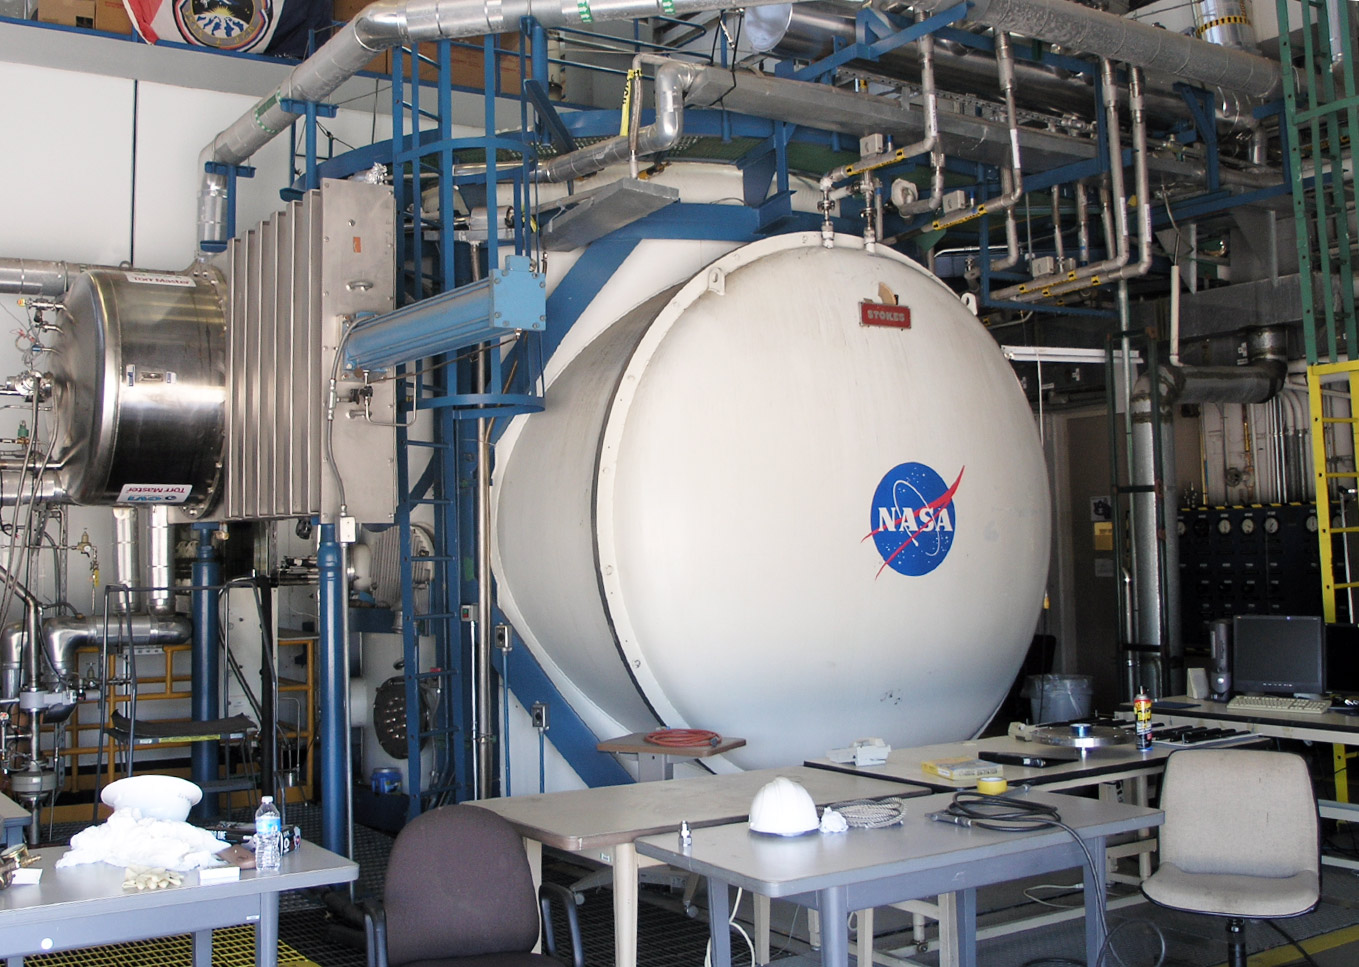 View of the Sunspot Thermal Vacuum Testing Facility at NASA Marshall Space Flight Center